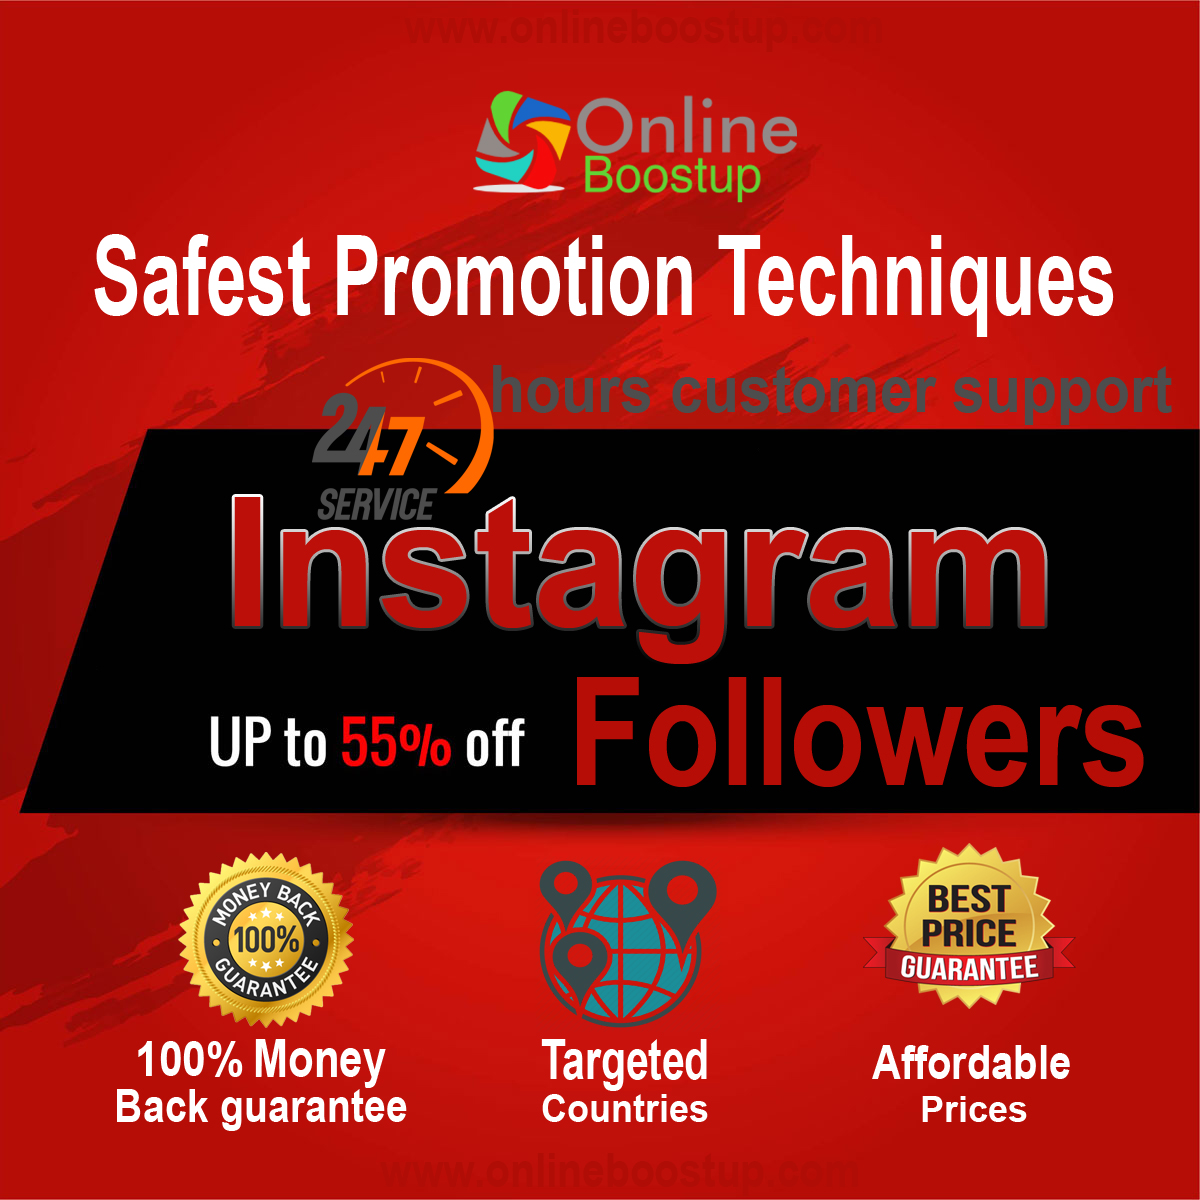 buy instagram followers - 2018 get instagram followers by doing this guaranteed